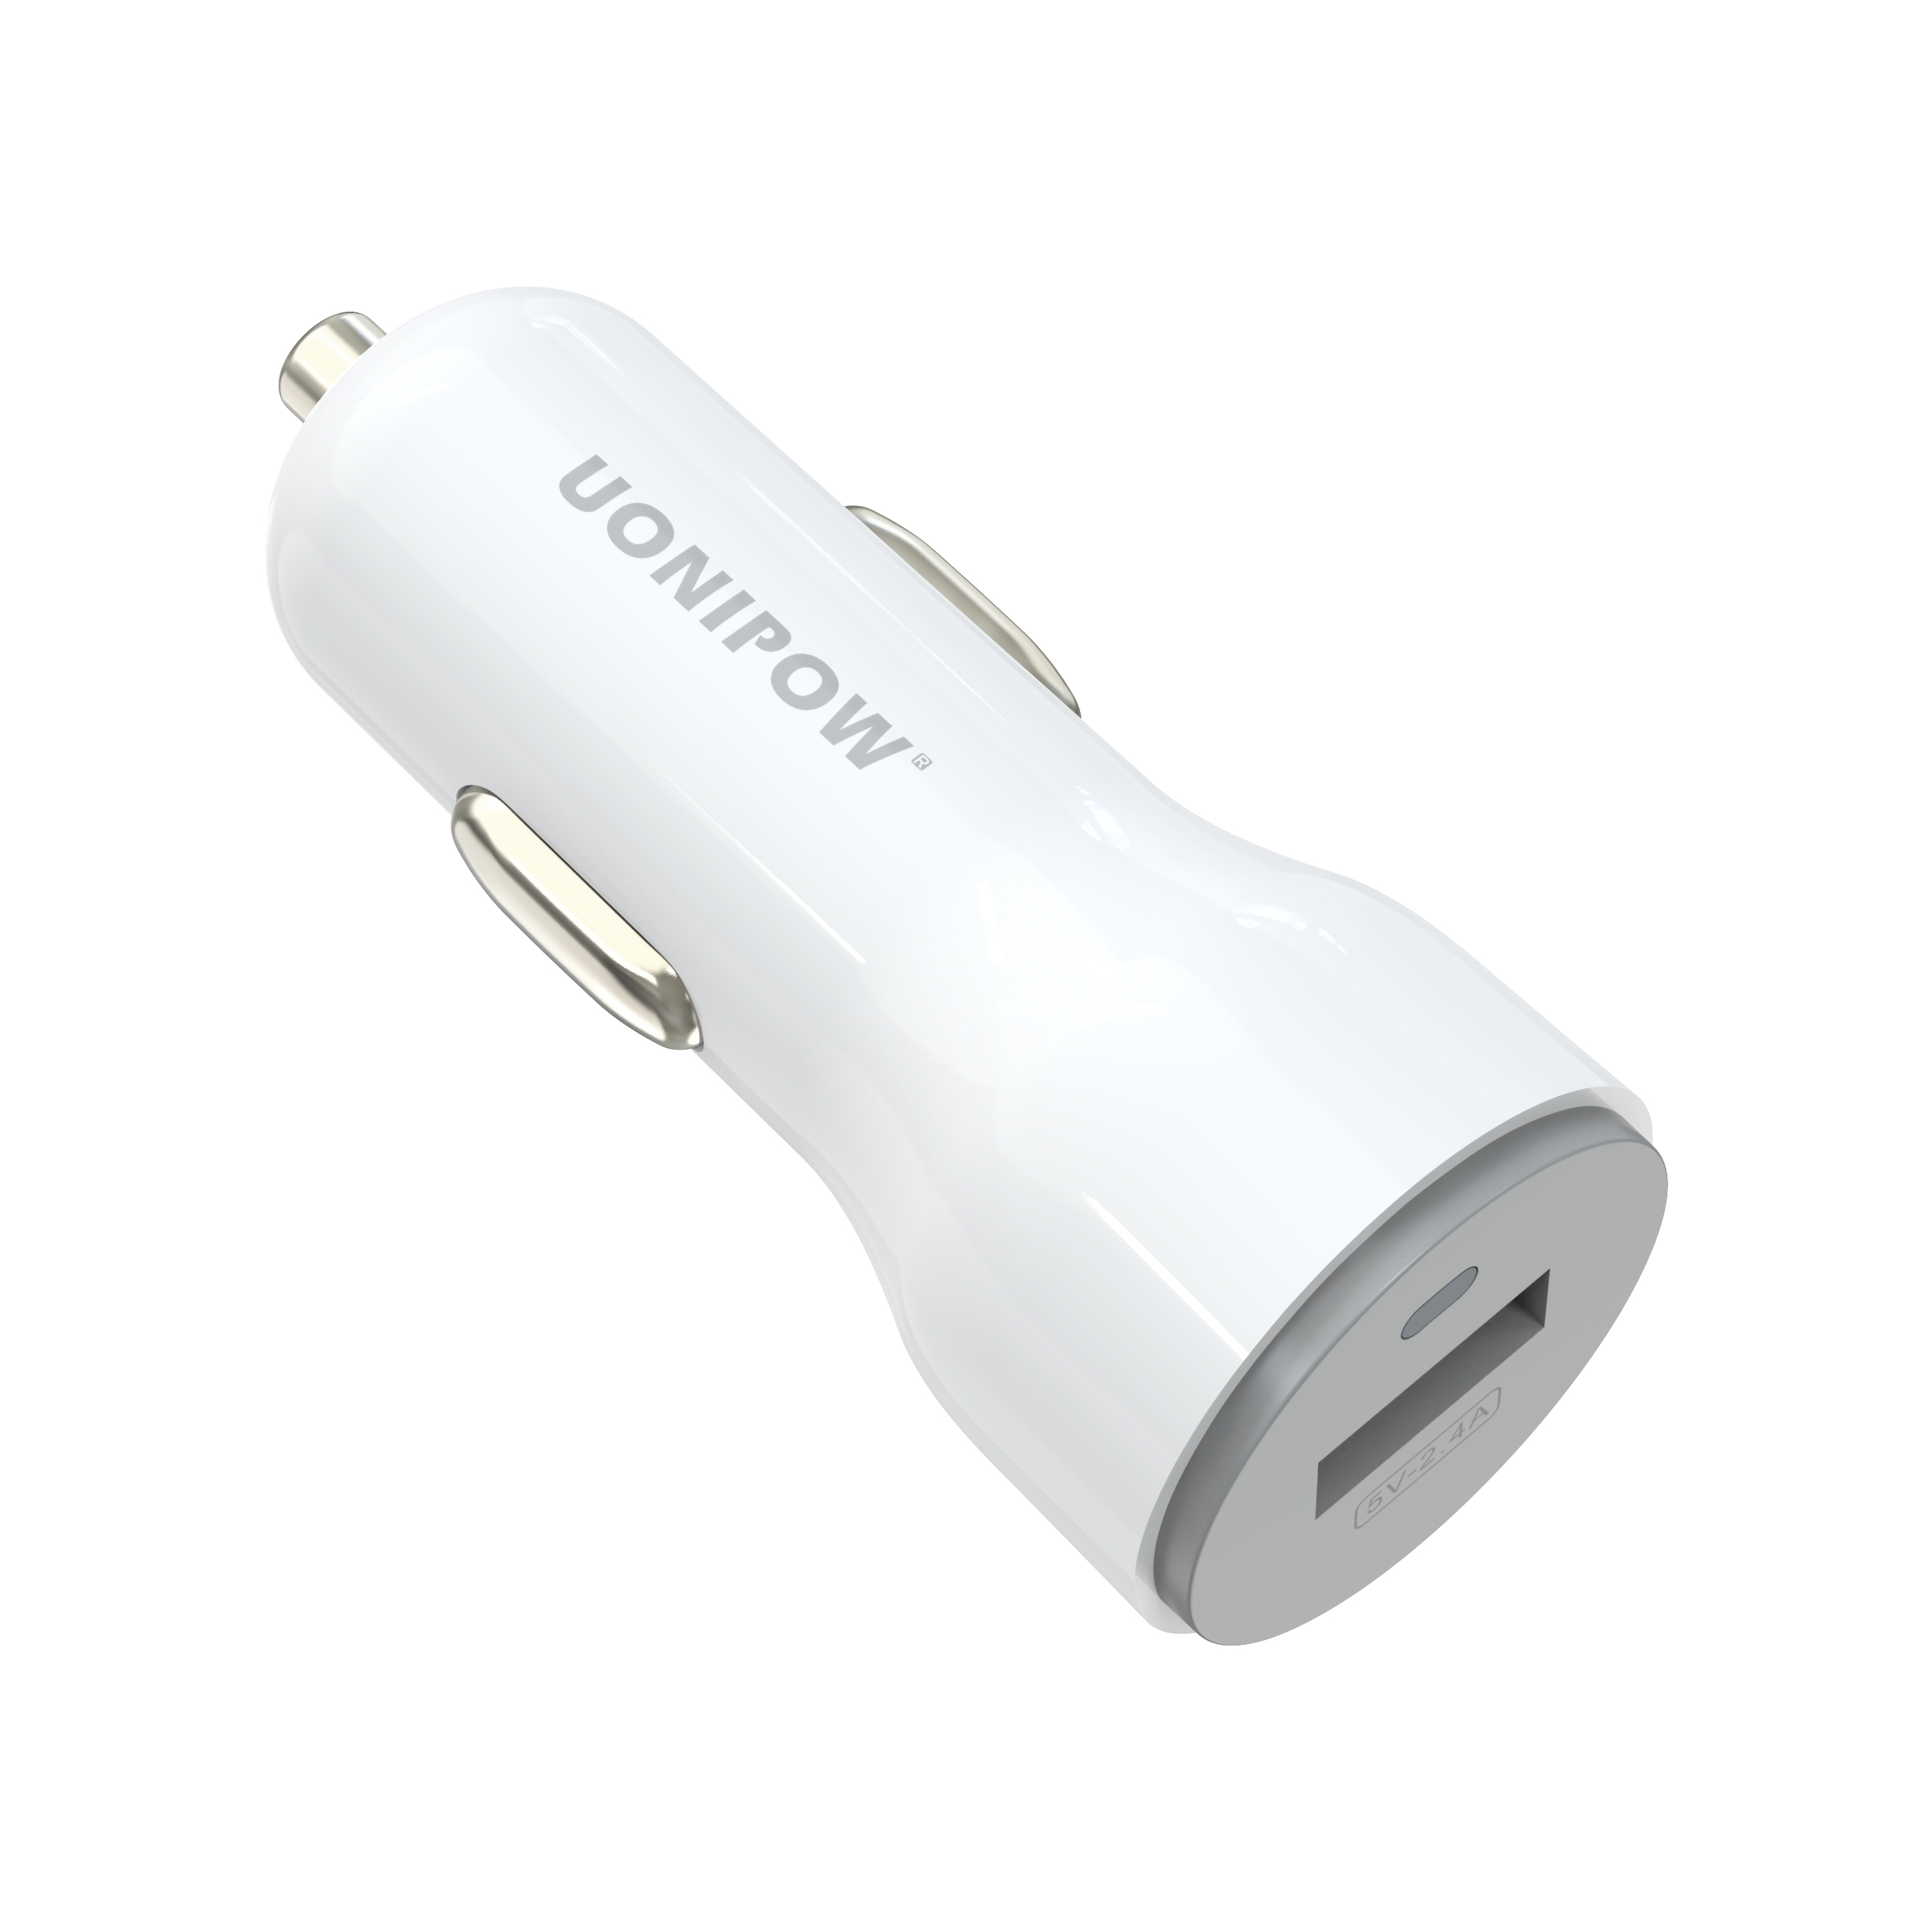 Single-port 2.4a car charger Manufacturers, Single-port 2.4a car charger Factory, Supply Single-port 2.4a car charger